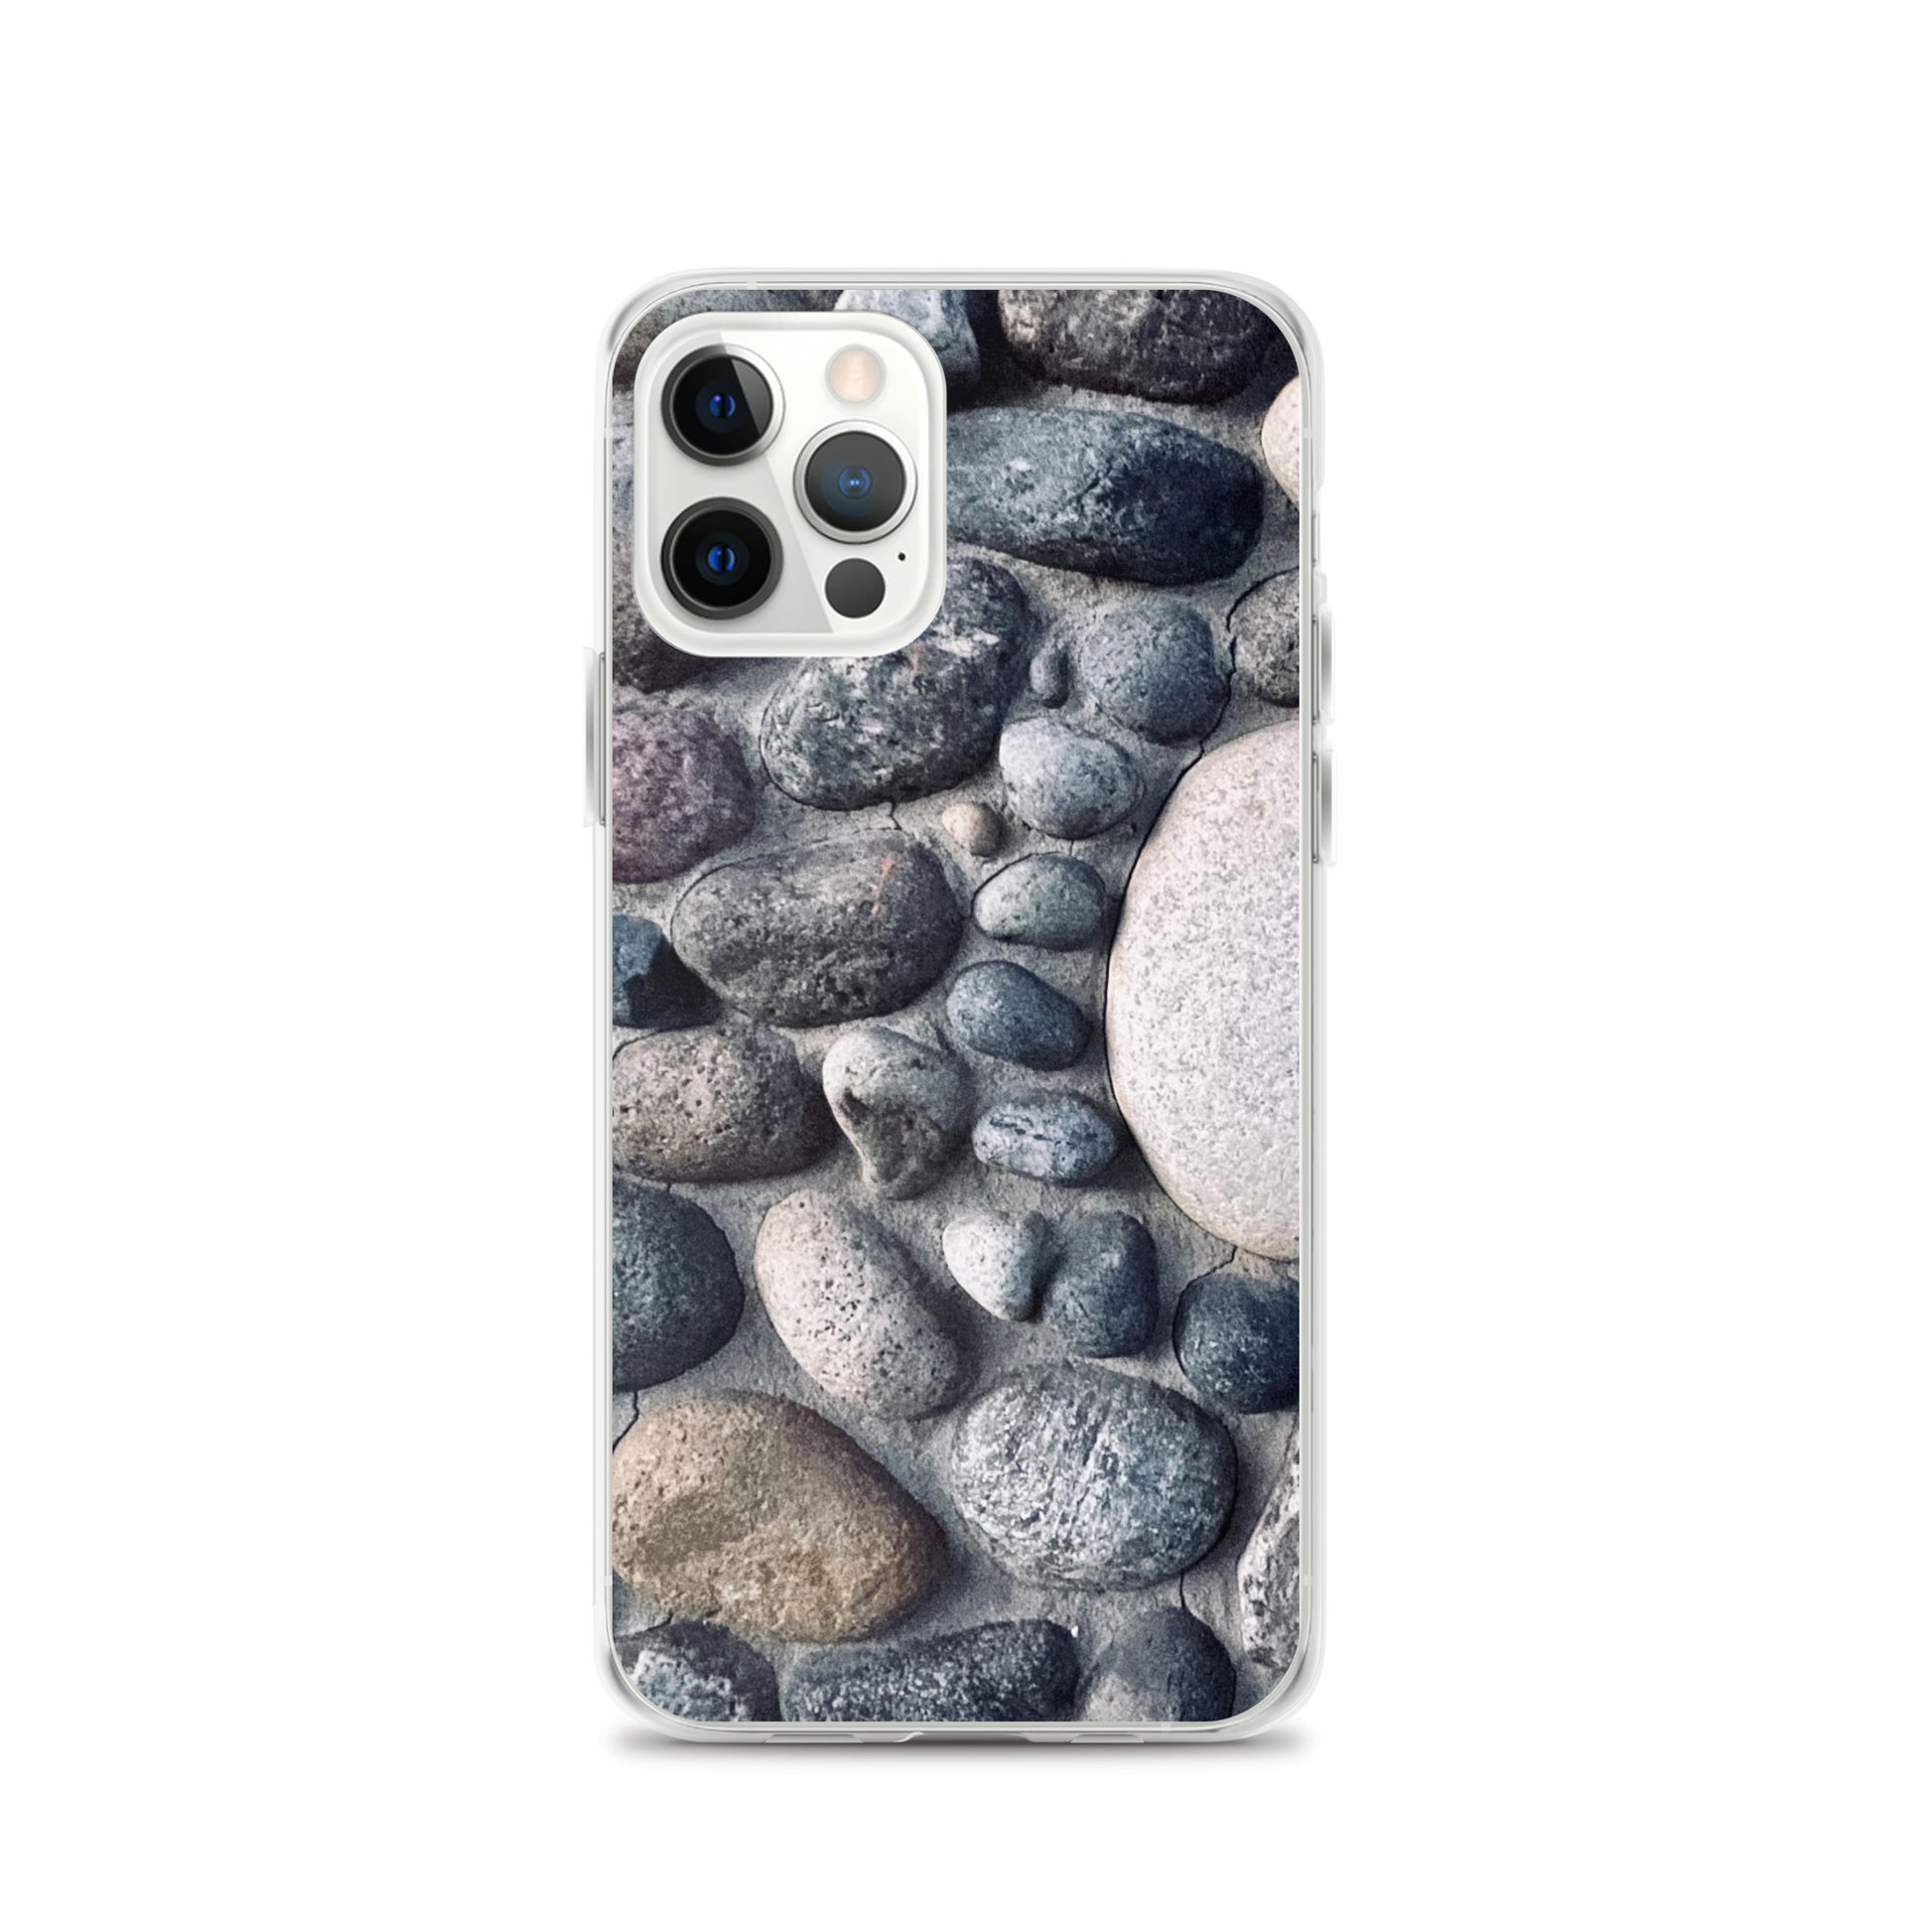 Rock n Rocks n More Rocks (iPhone Case) - Comfortable Culture - iPhone 12 Pro - Mobile Phone Cases - Comfortable Culture